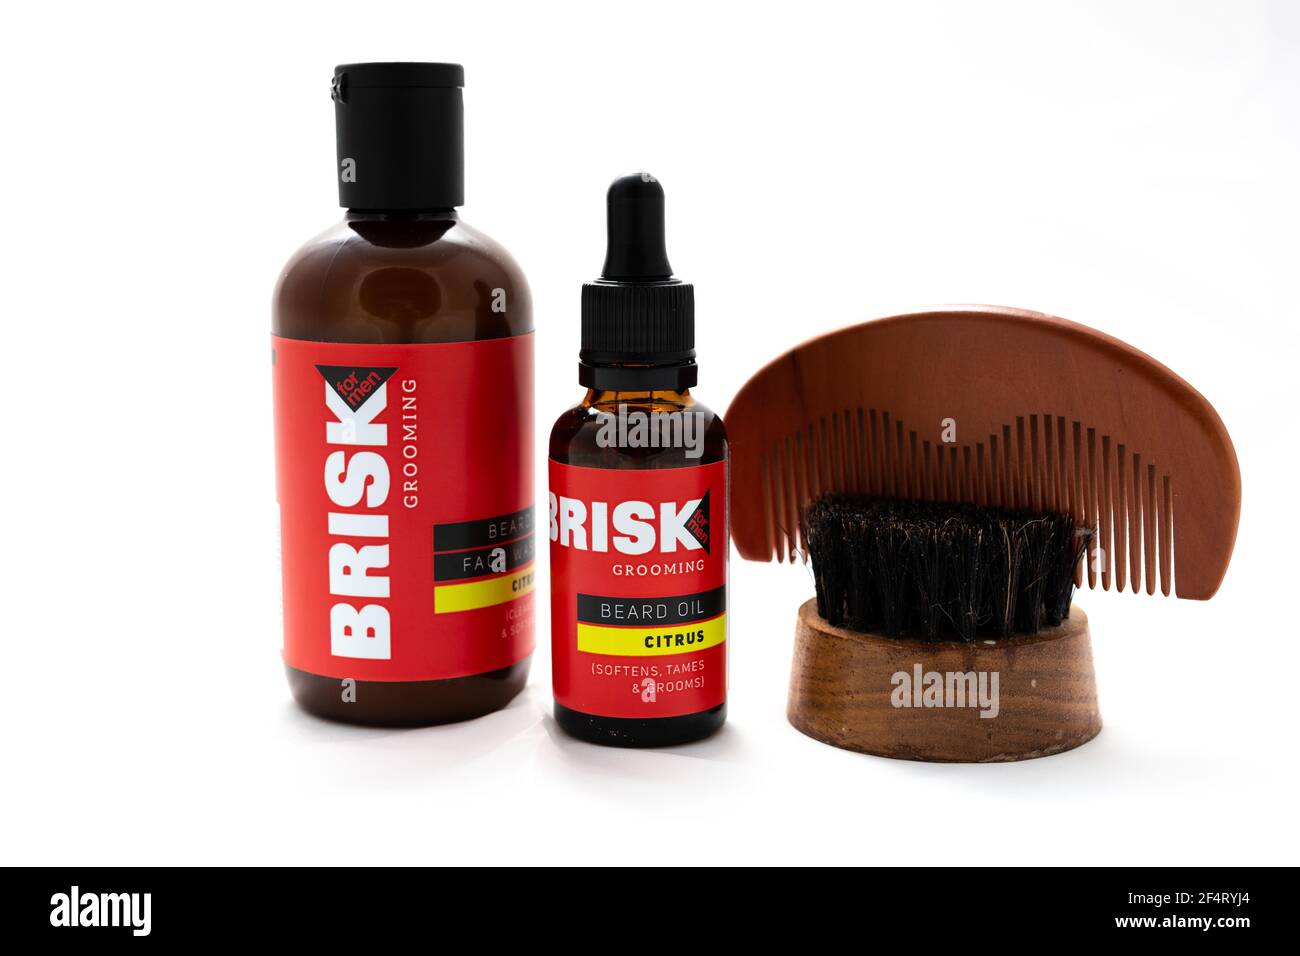 Woodbridge, Suffolk, UK March 10 2021: A selection of beard grooming products from Brisk Stock Photo